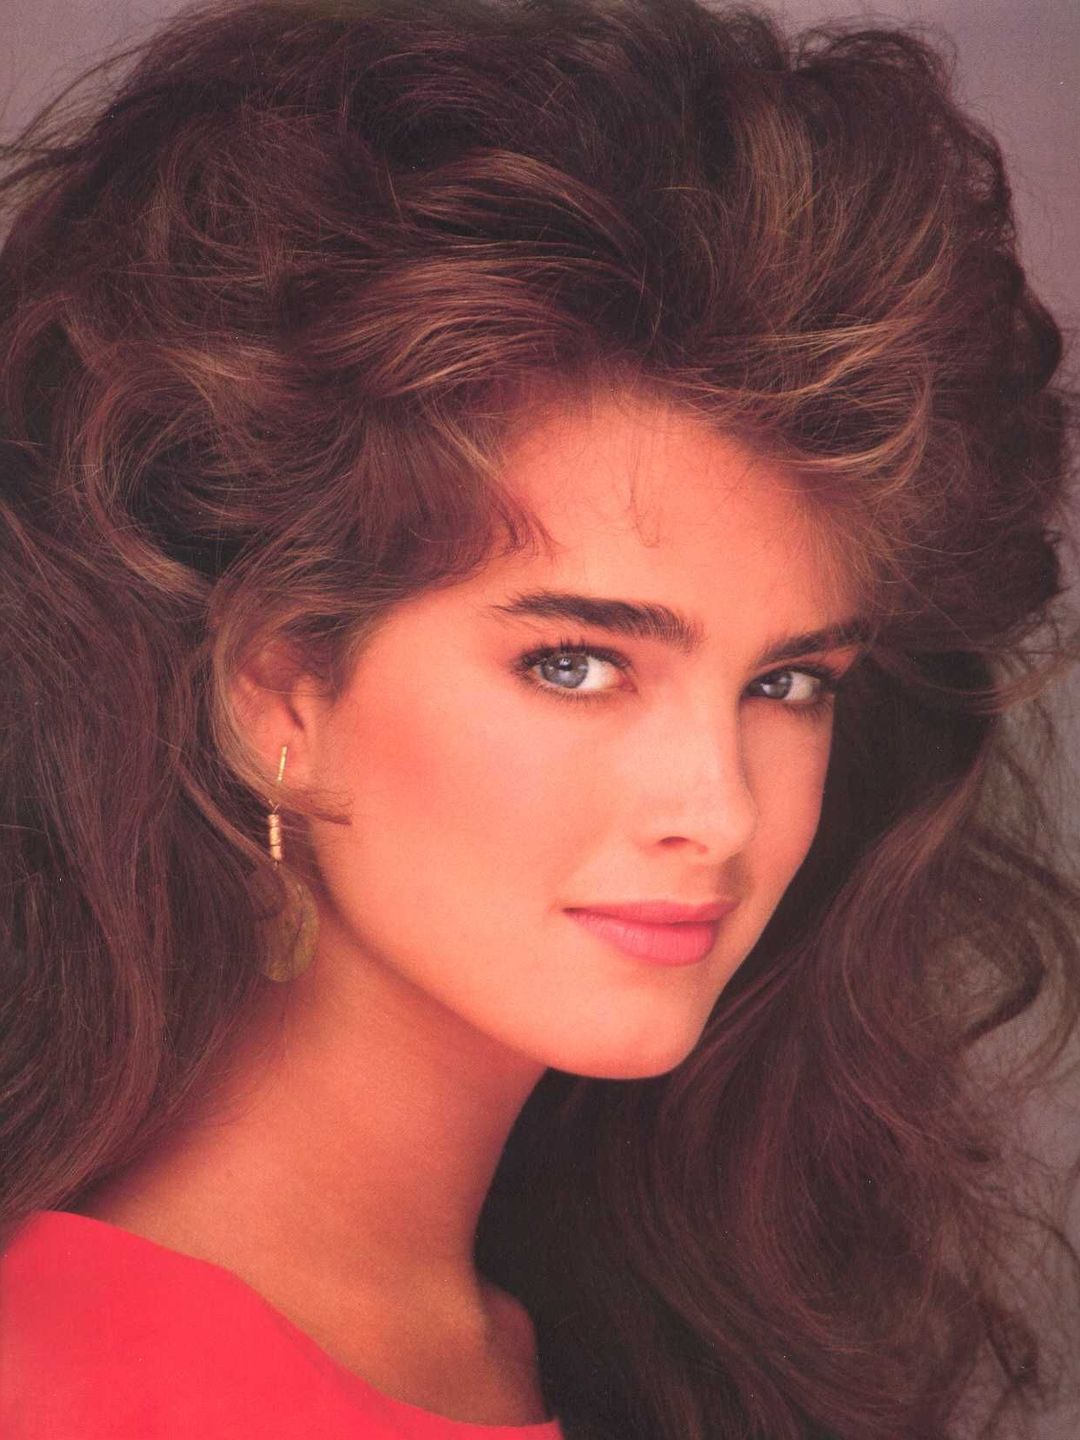 Brooke Shields in real life